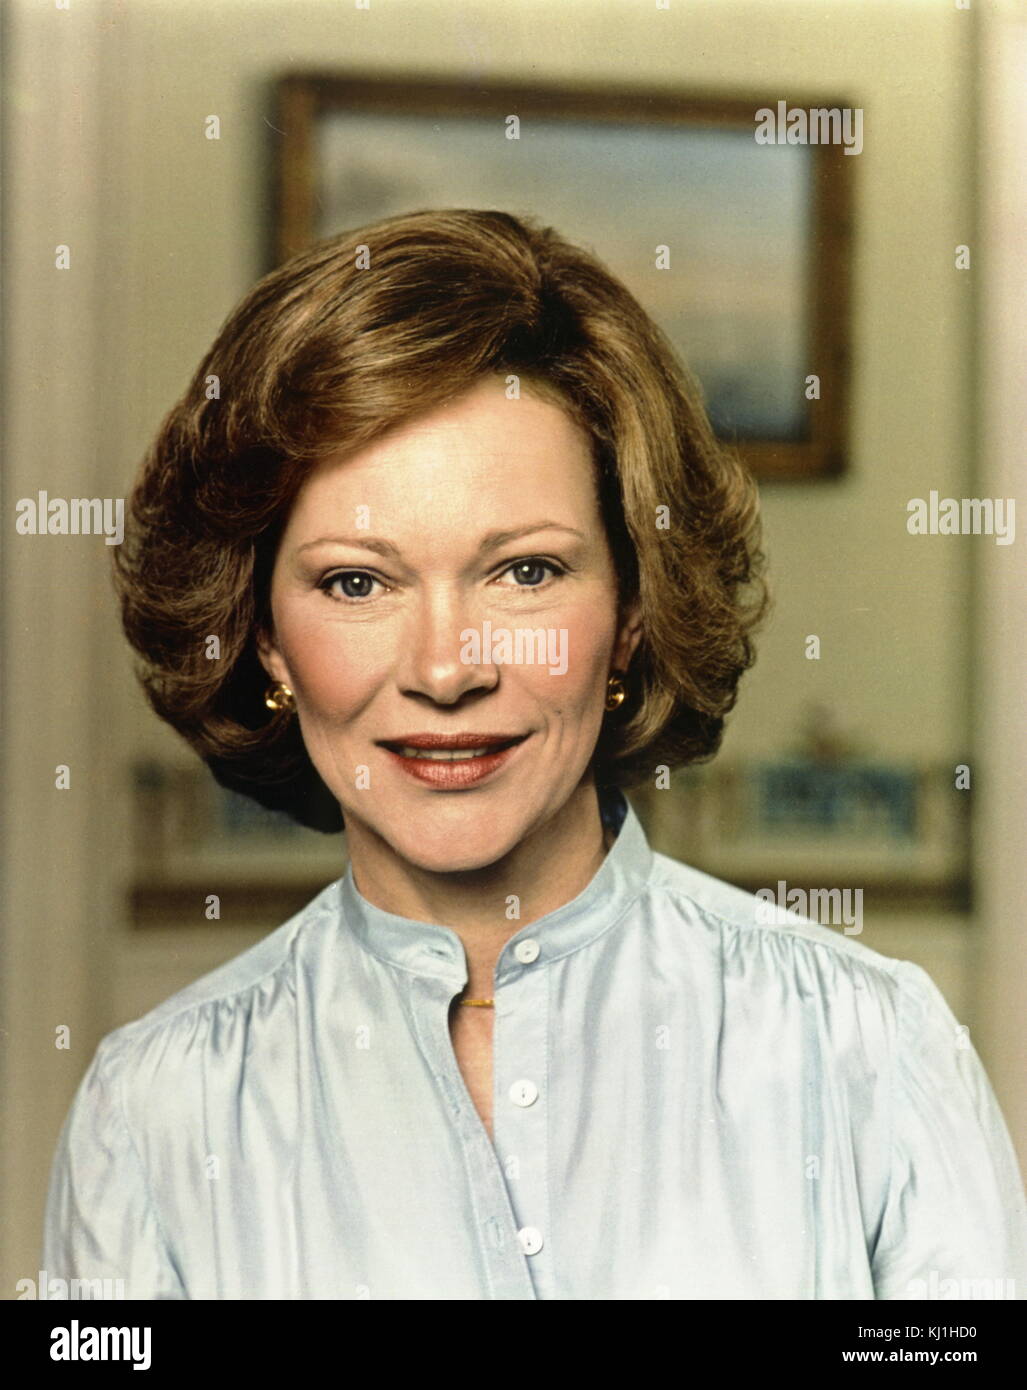 Rosalynn Carter (born 1927) wife of US president Jimmy Carter, the 39th President of the United States from 1977 to 1981. In 2002, Stock Photo